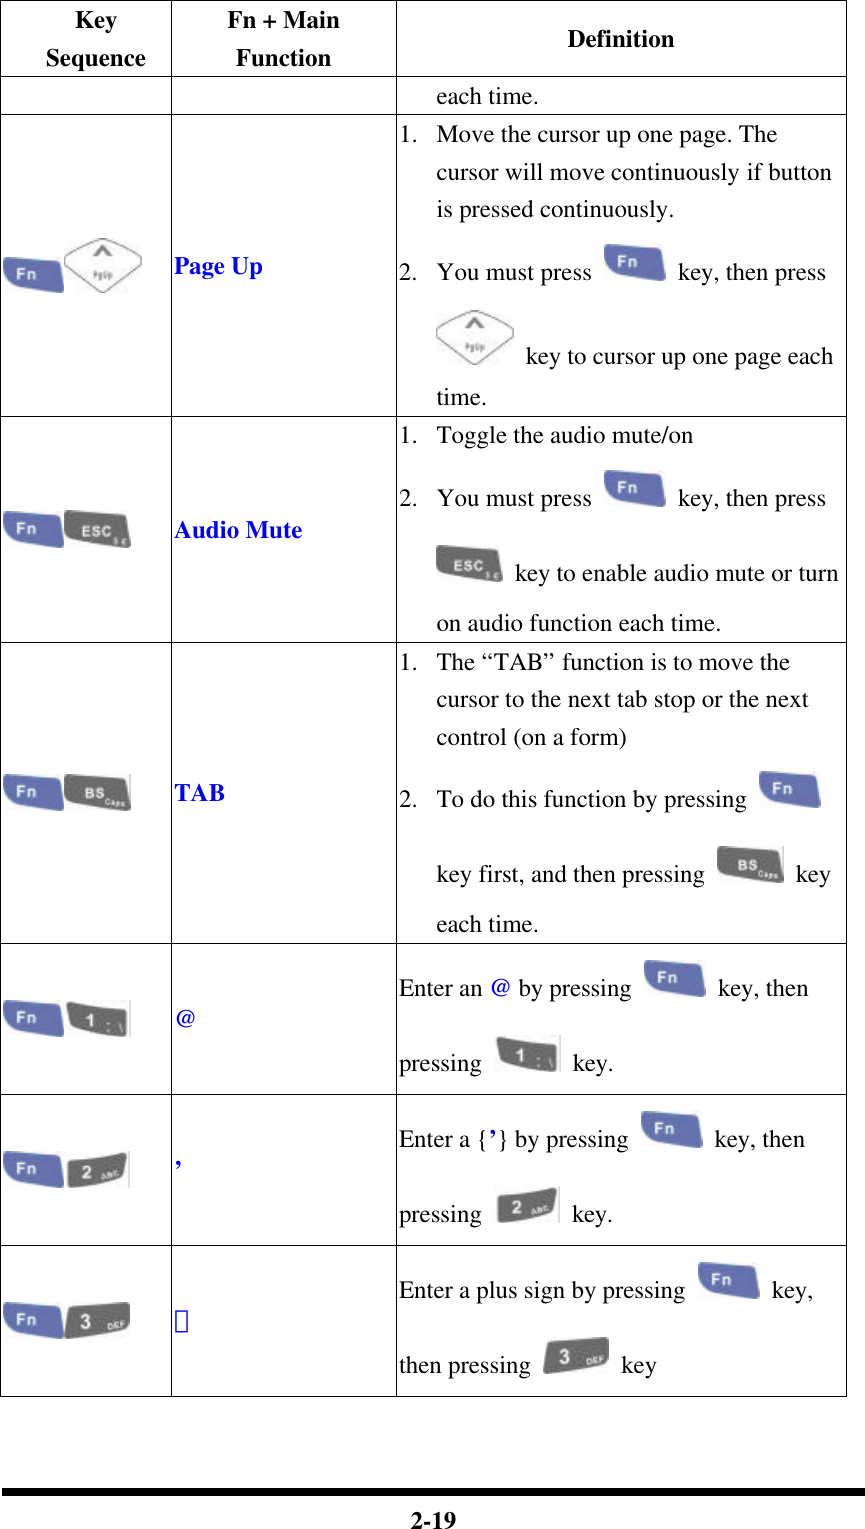  2-19 Key Sequence Fn + Main Function Definition each time.  Page Up 1.  Move the cursor up one page. The cursor will move continuously if button is pressed continuously. 2.  You must press   key, then press  key to cursor up one page each time.  Audio Mute 1.  Toggle the audio mute/on 2.  You must press   key, then press  key to enable audio mute or turn on audio function each time.  TAB 1.  The “TAB” function is to move the cursor to the next tab stop or the next control (on a form) 2.  To do this function by pressing   key first, and then pressing   key each time.  @ Enter an @ by pressing   key, then pressing   key.  ’ Enter a {’} by pressing  key, then pressing   key.  ＋ Enter a plus sign by pressing   key, then pressing   key 